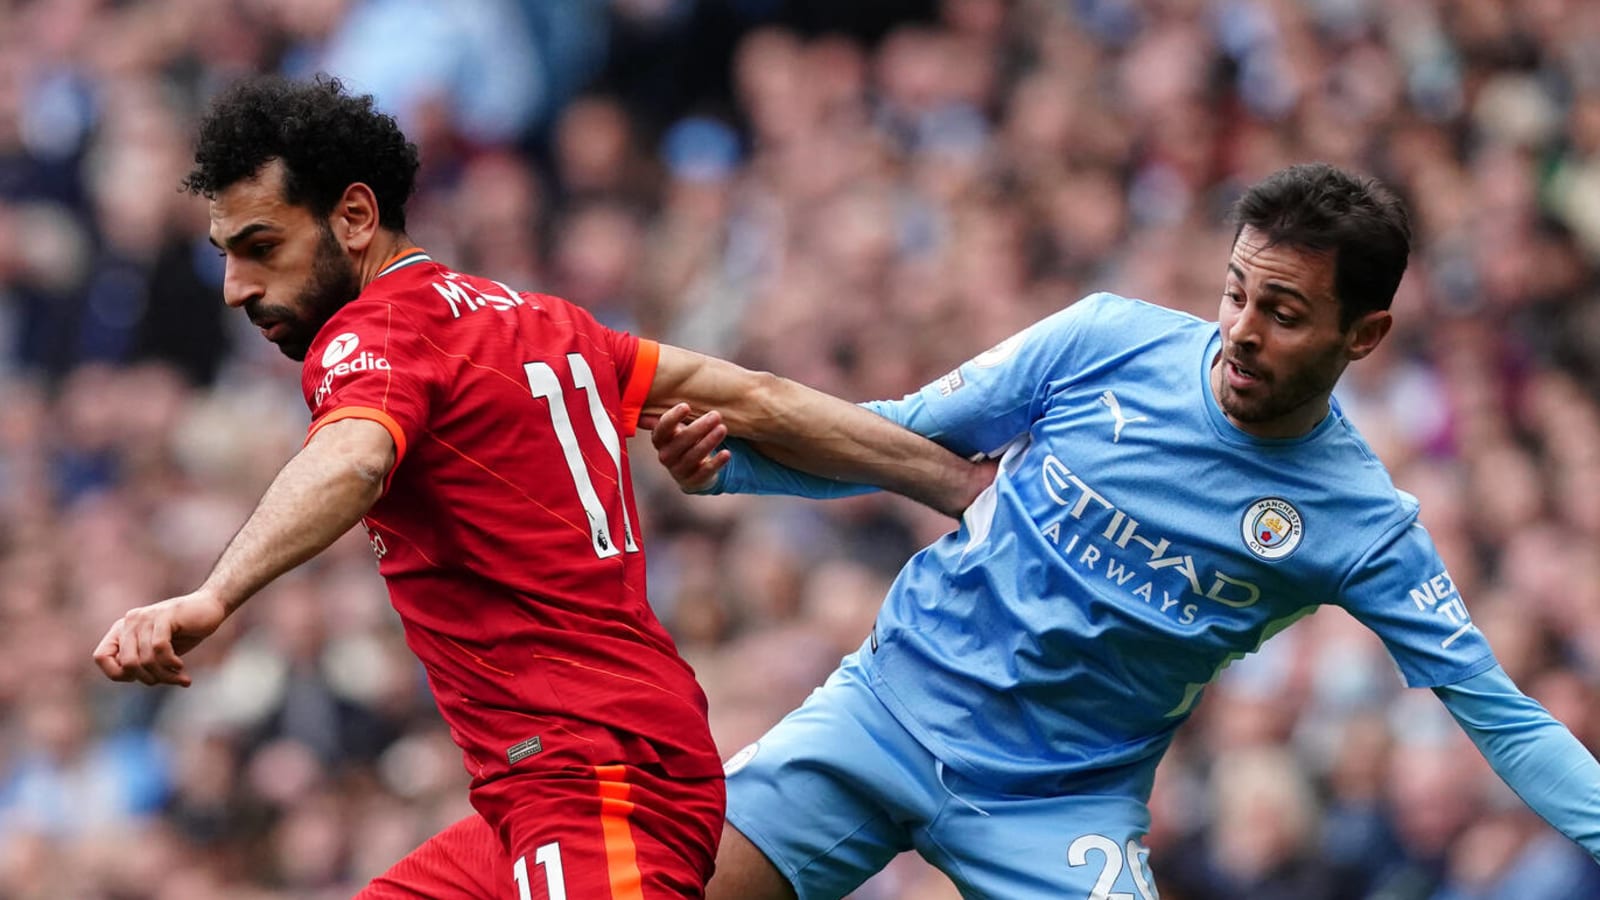 Liverpool, Man City draw 2-2 in battle of EPL's best